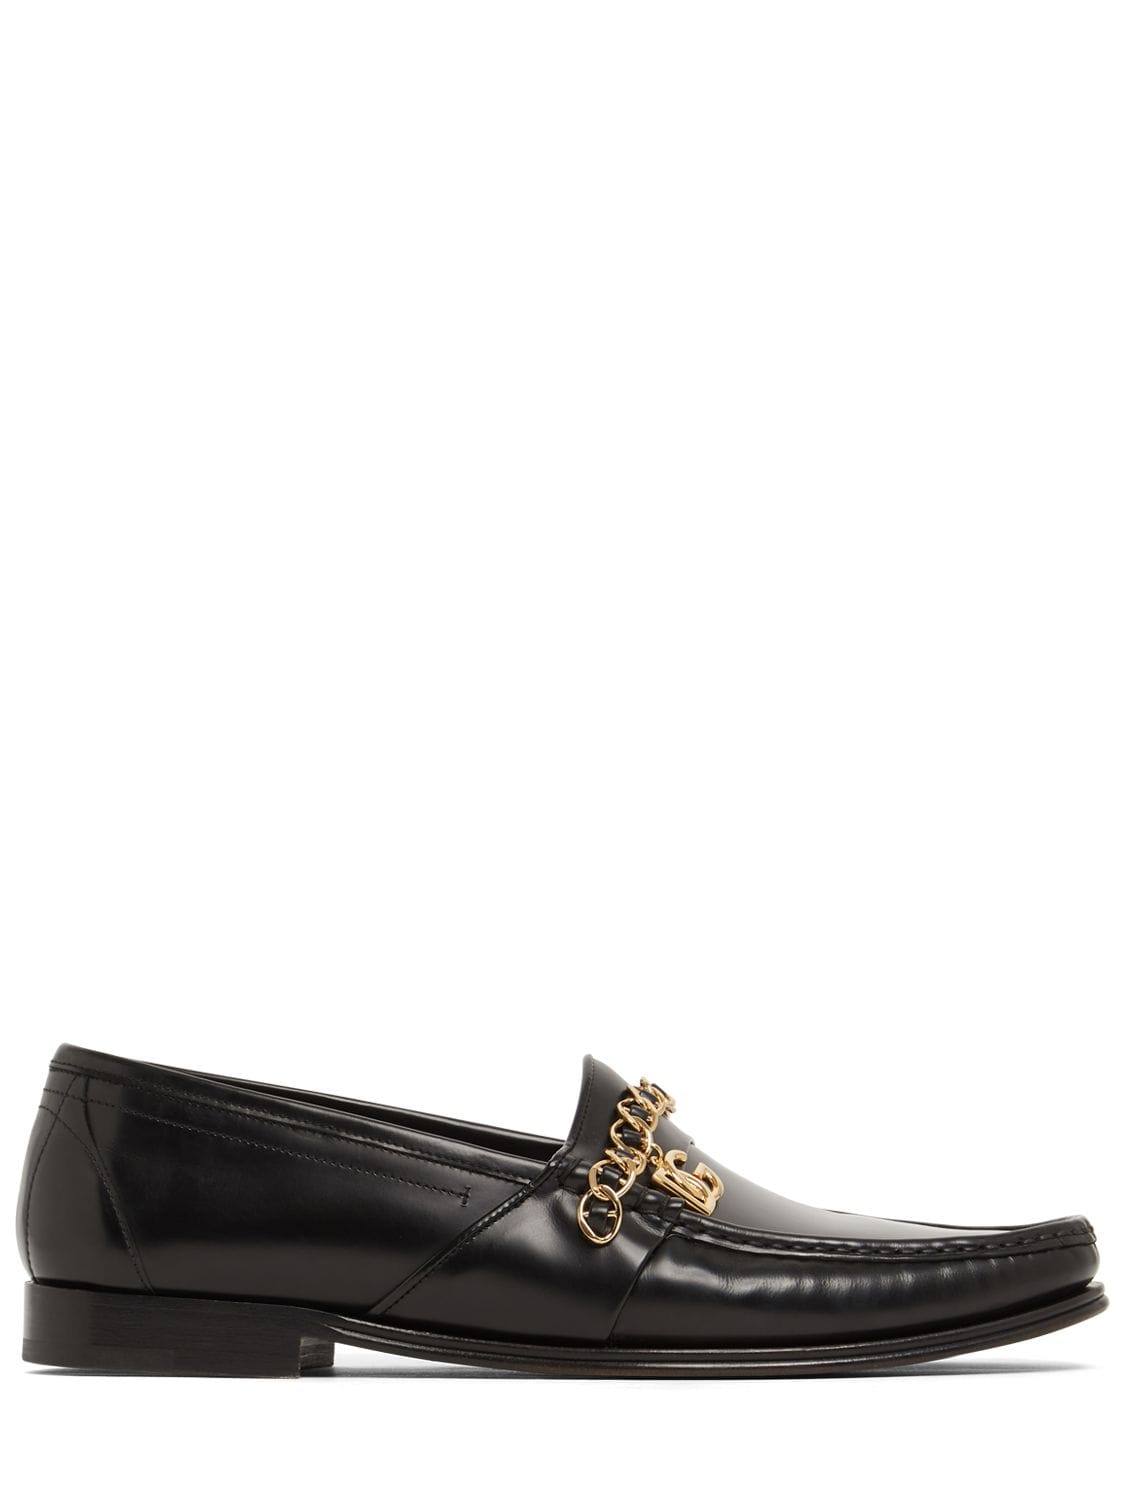 DOLCE & GABBANA POLISHED LEATHER LOAFERS W/ CHAIN